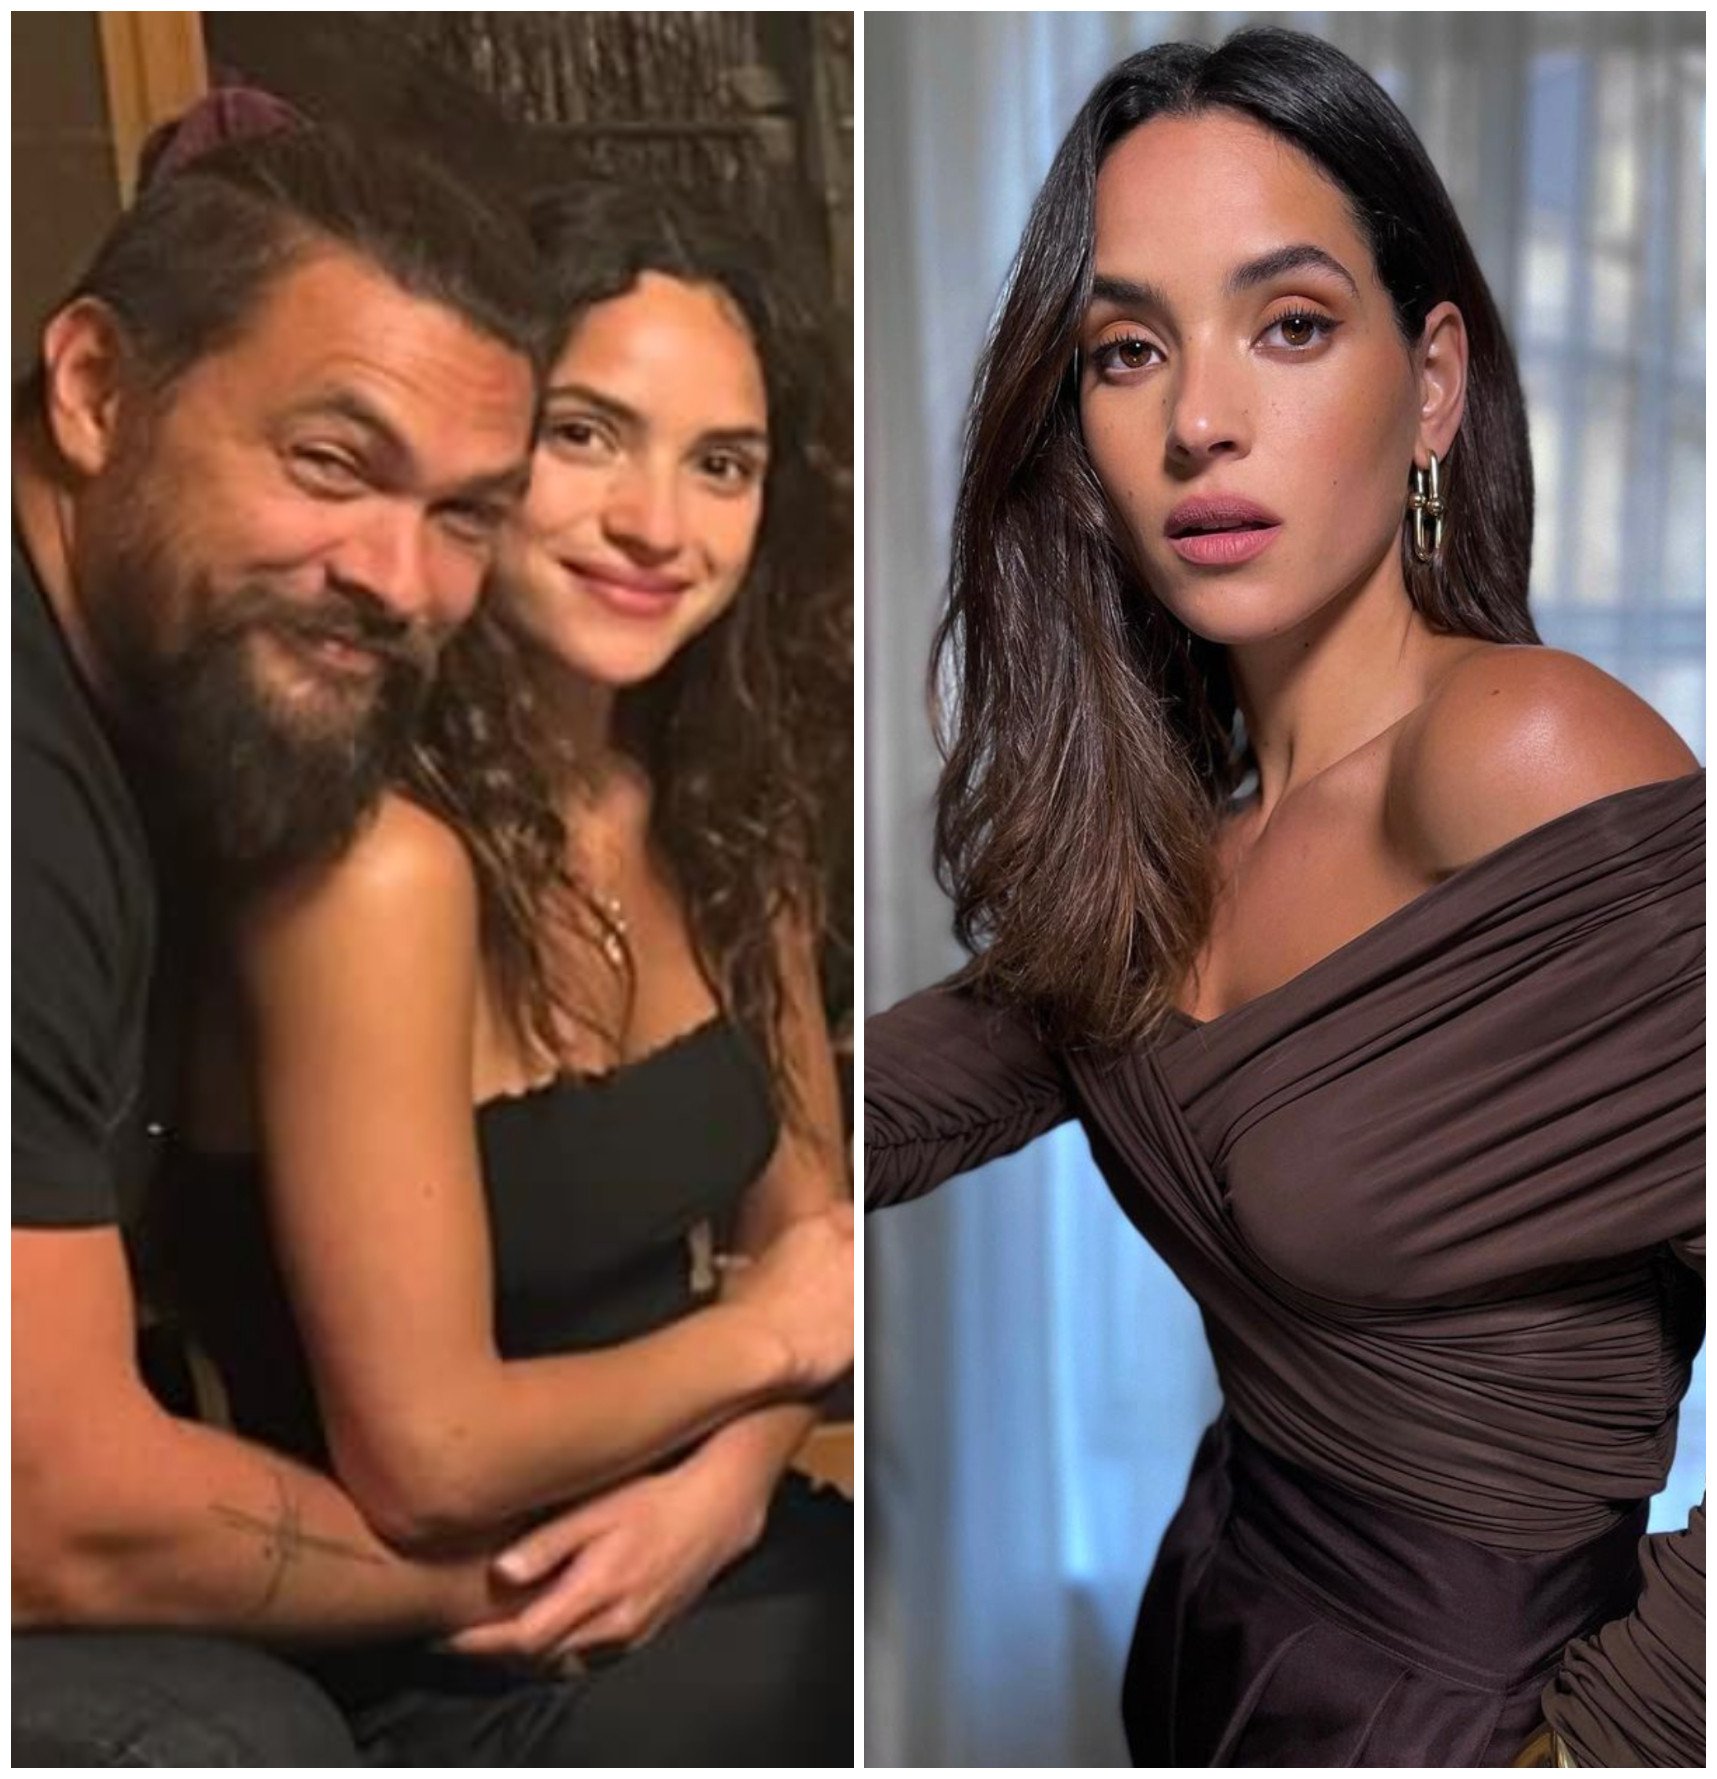 Making it official: Jason Momoa posted several photos from a recent Japan trip on his Instagram – with his girlfriend Adria Arjona. Photos: @prideofgypsies, @adriaarjona/Instagram